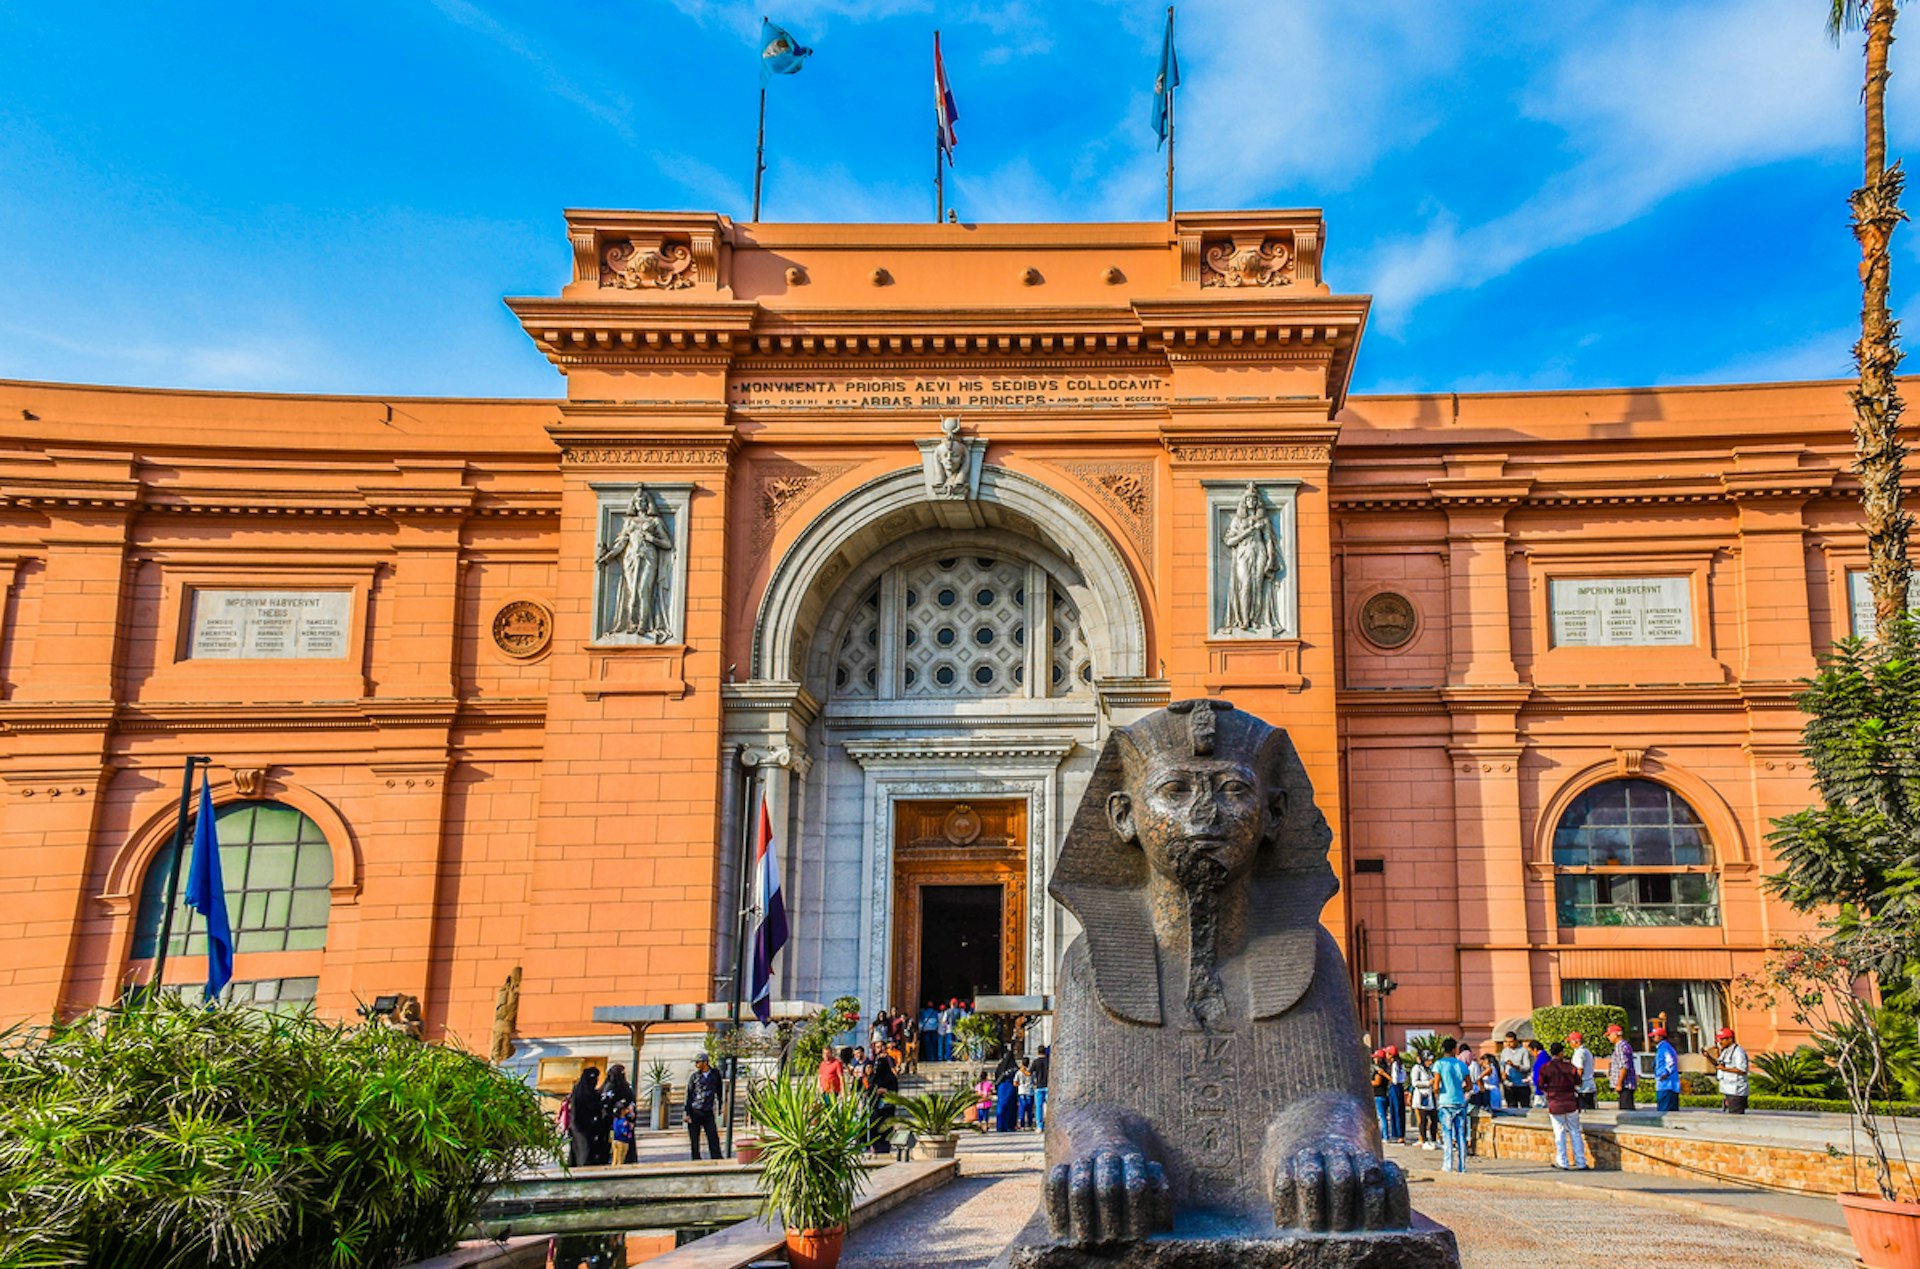 A sphinx outside a salmon-pink historic building in a city square